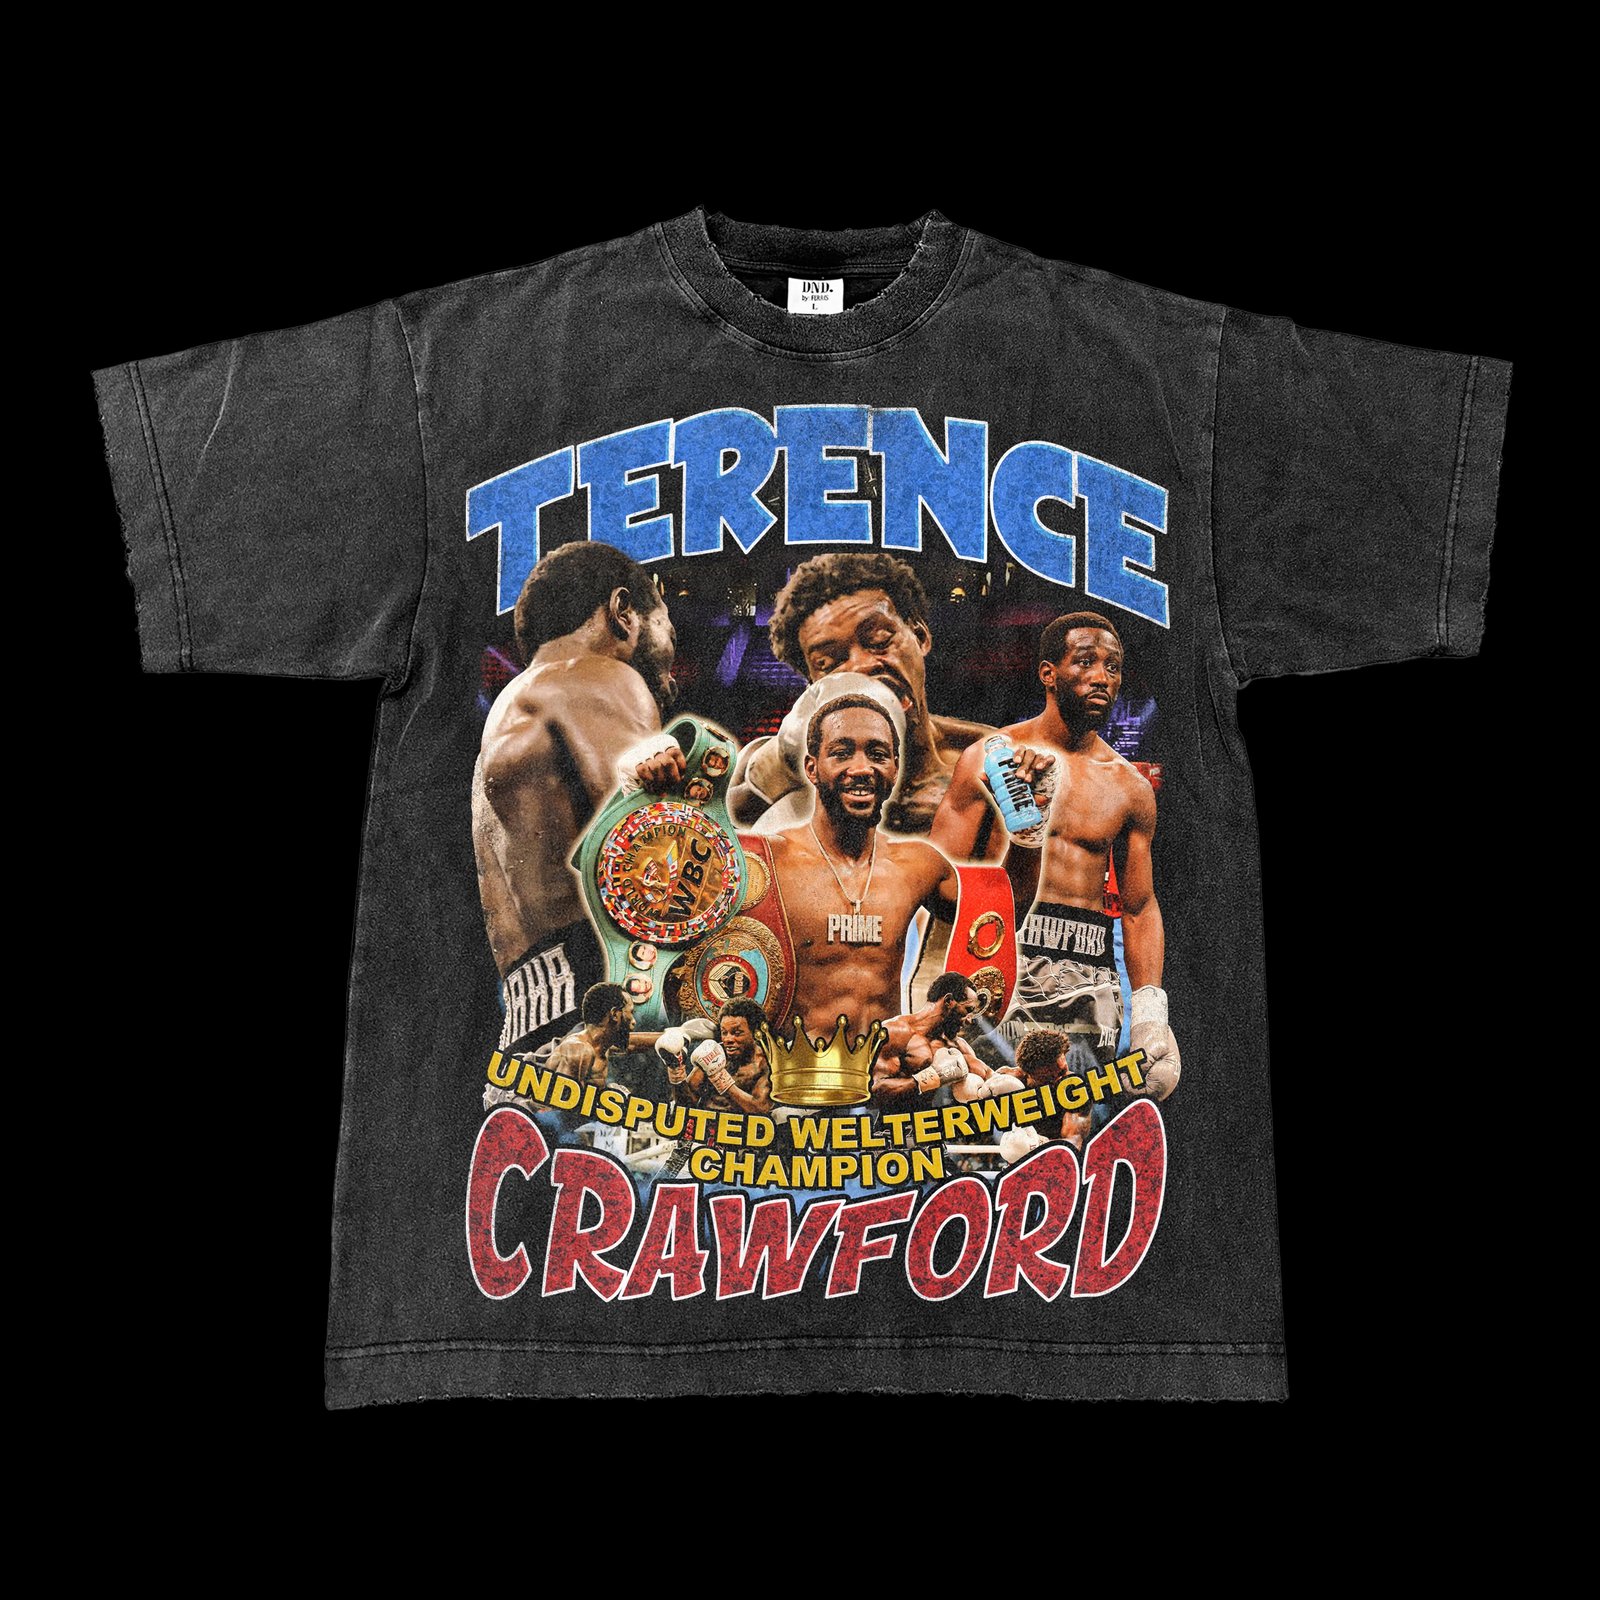 Terence Crawford T